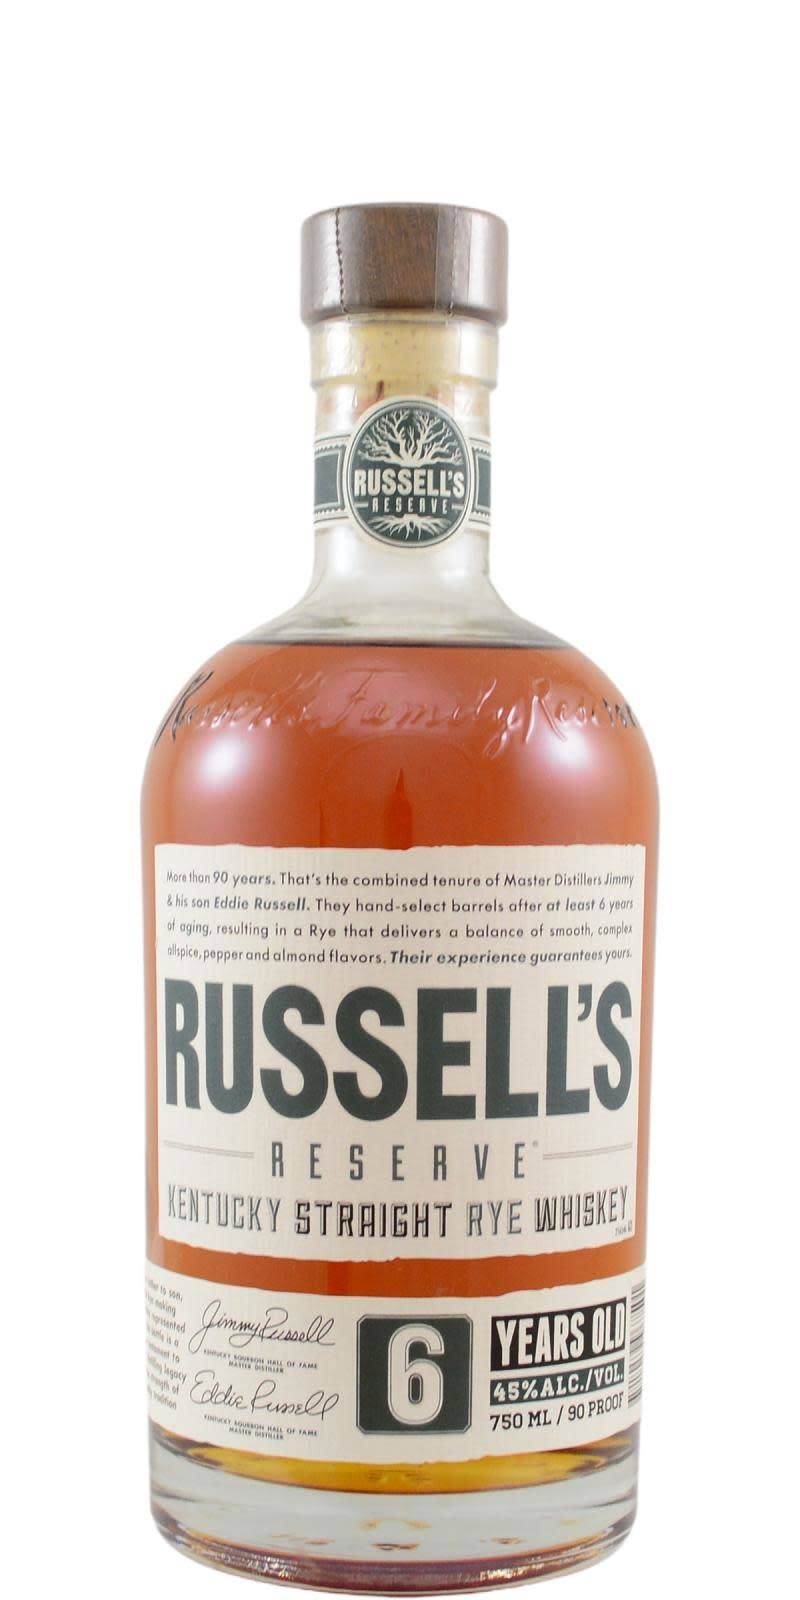 The Wild Turkey Distilling Company Russell's Reserve Kentucky Straight Whiskey